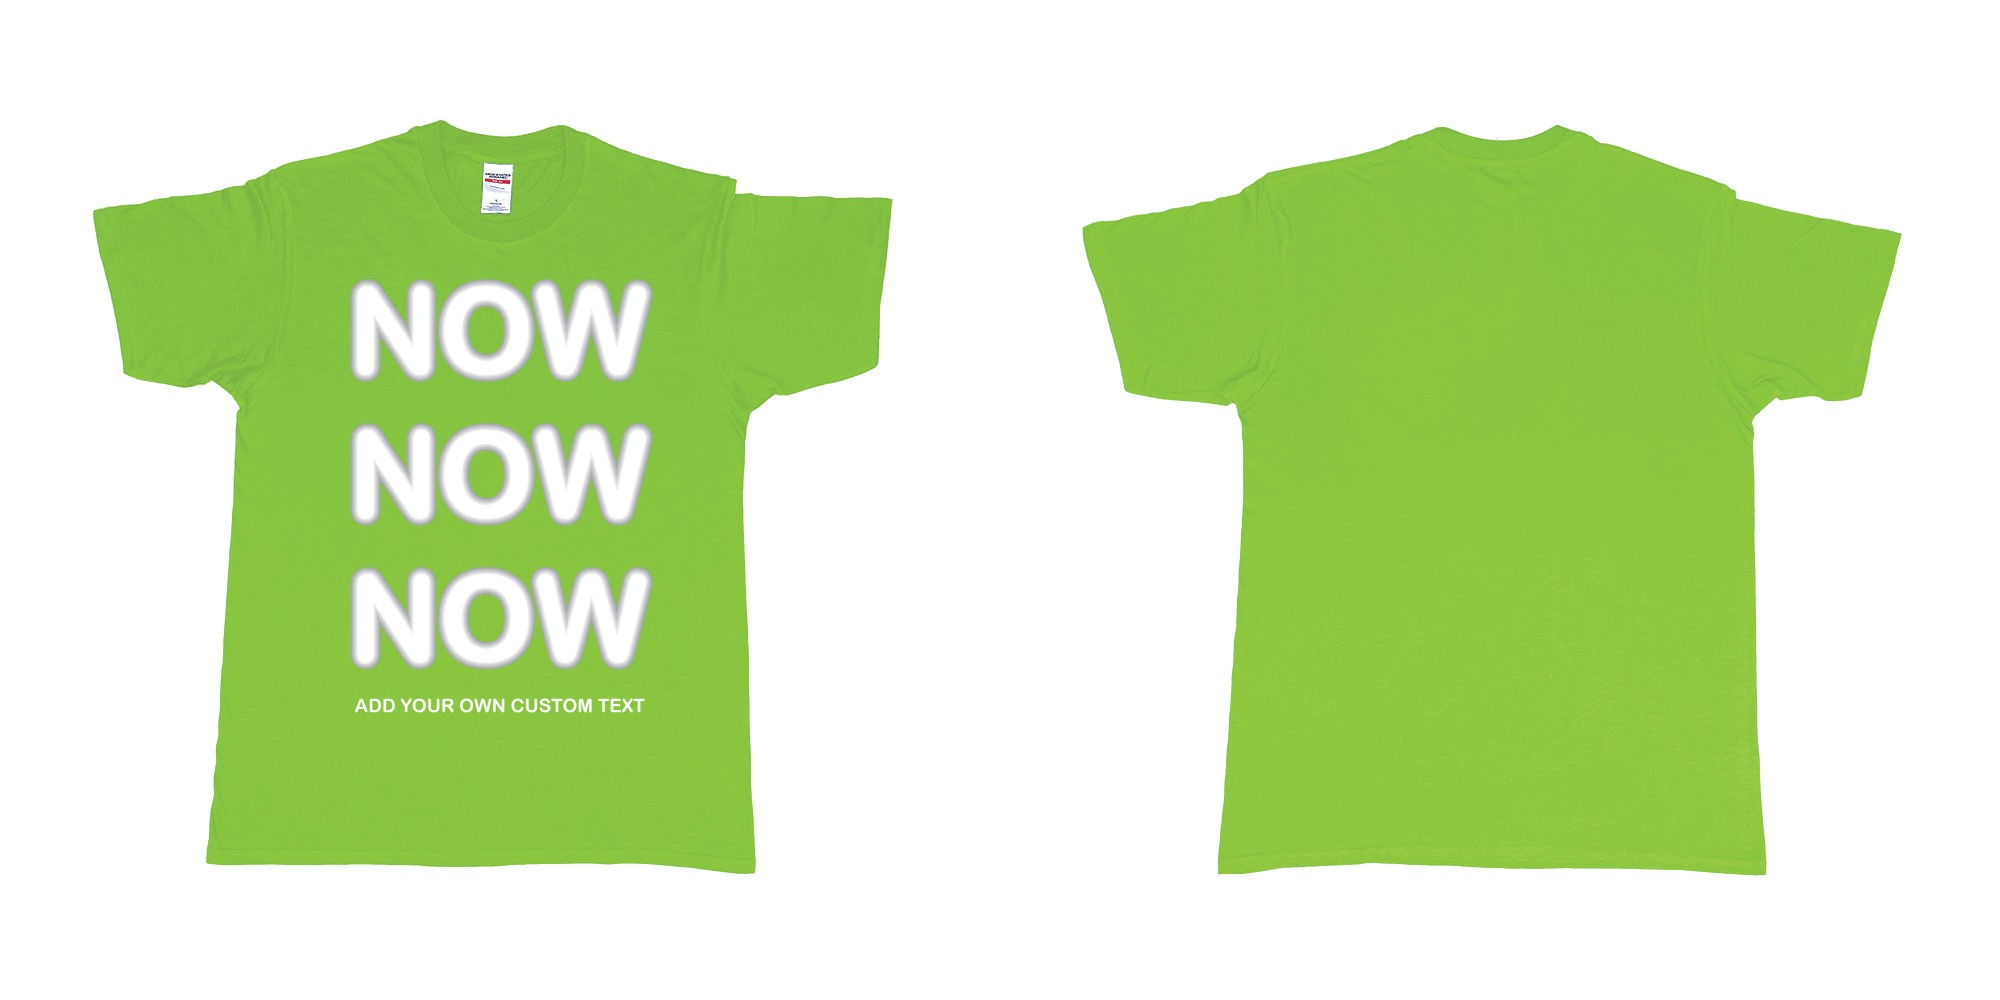 Custom tshirt design now now now add custom text tees in fabric color lime choice your own text made in Bali by The Pirate Way